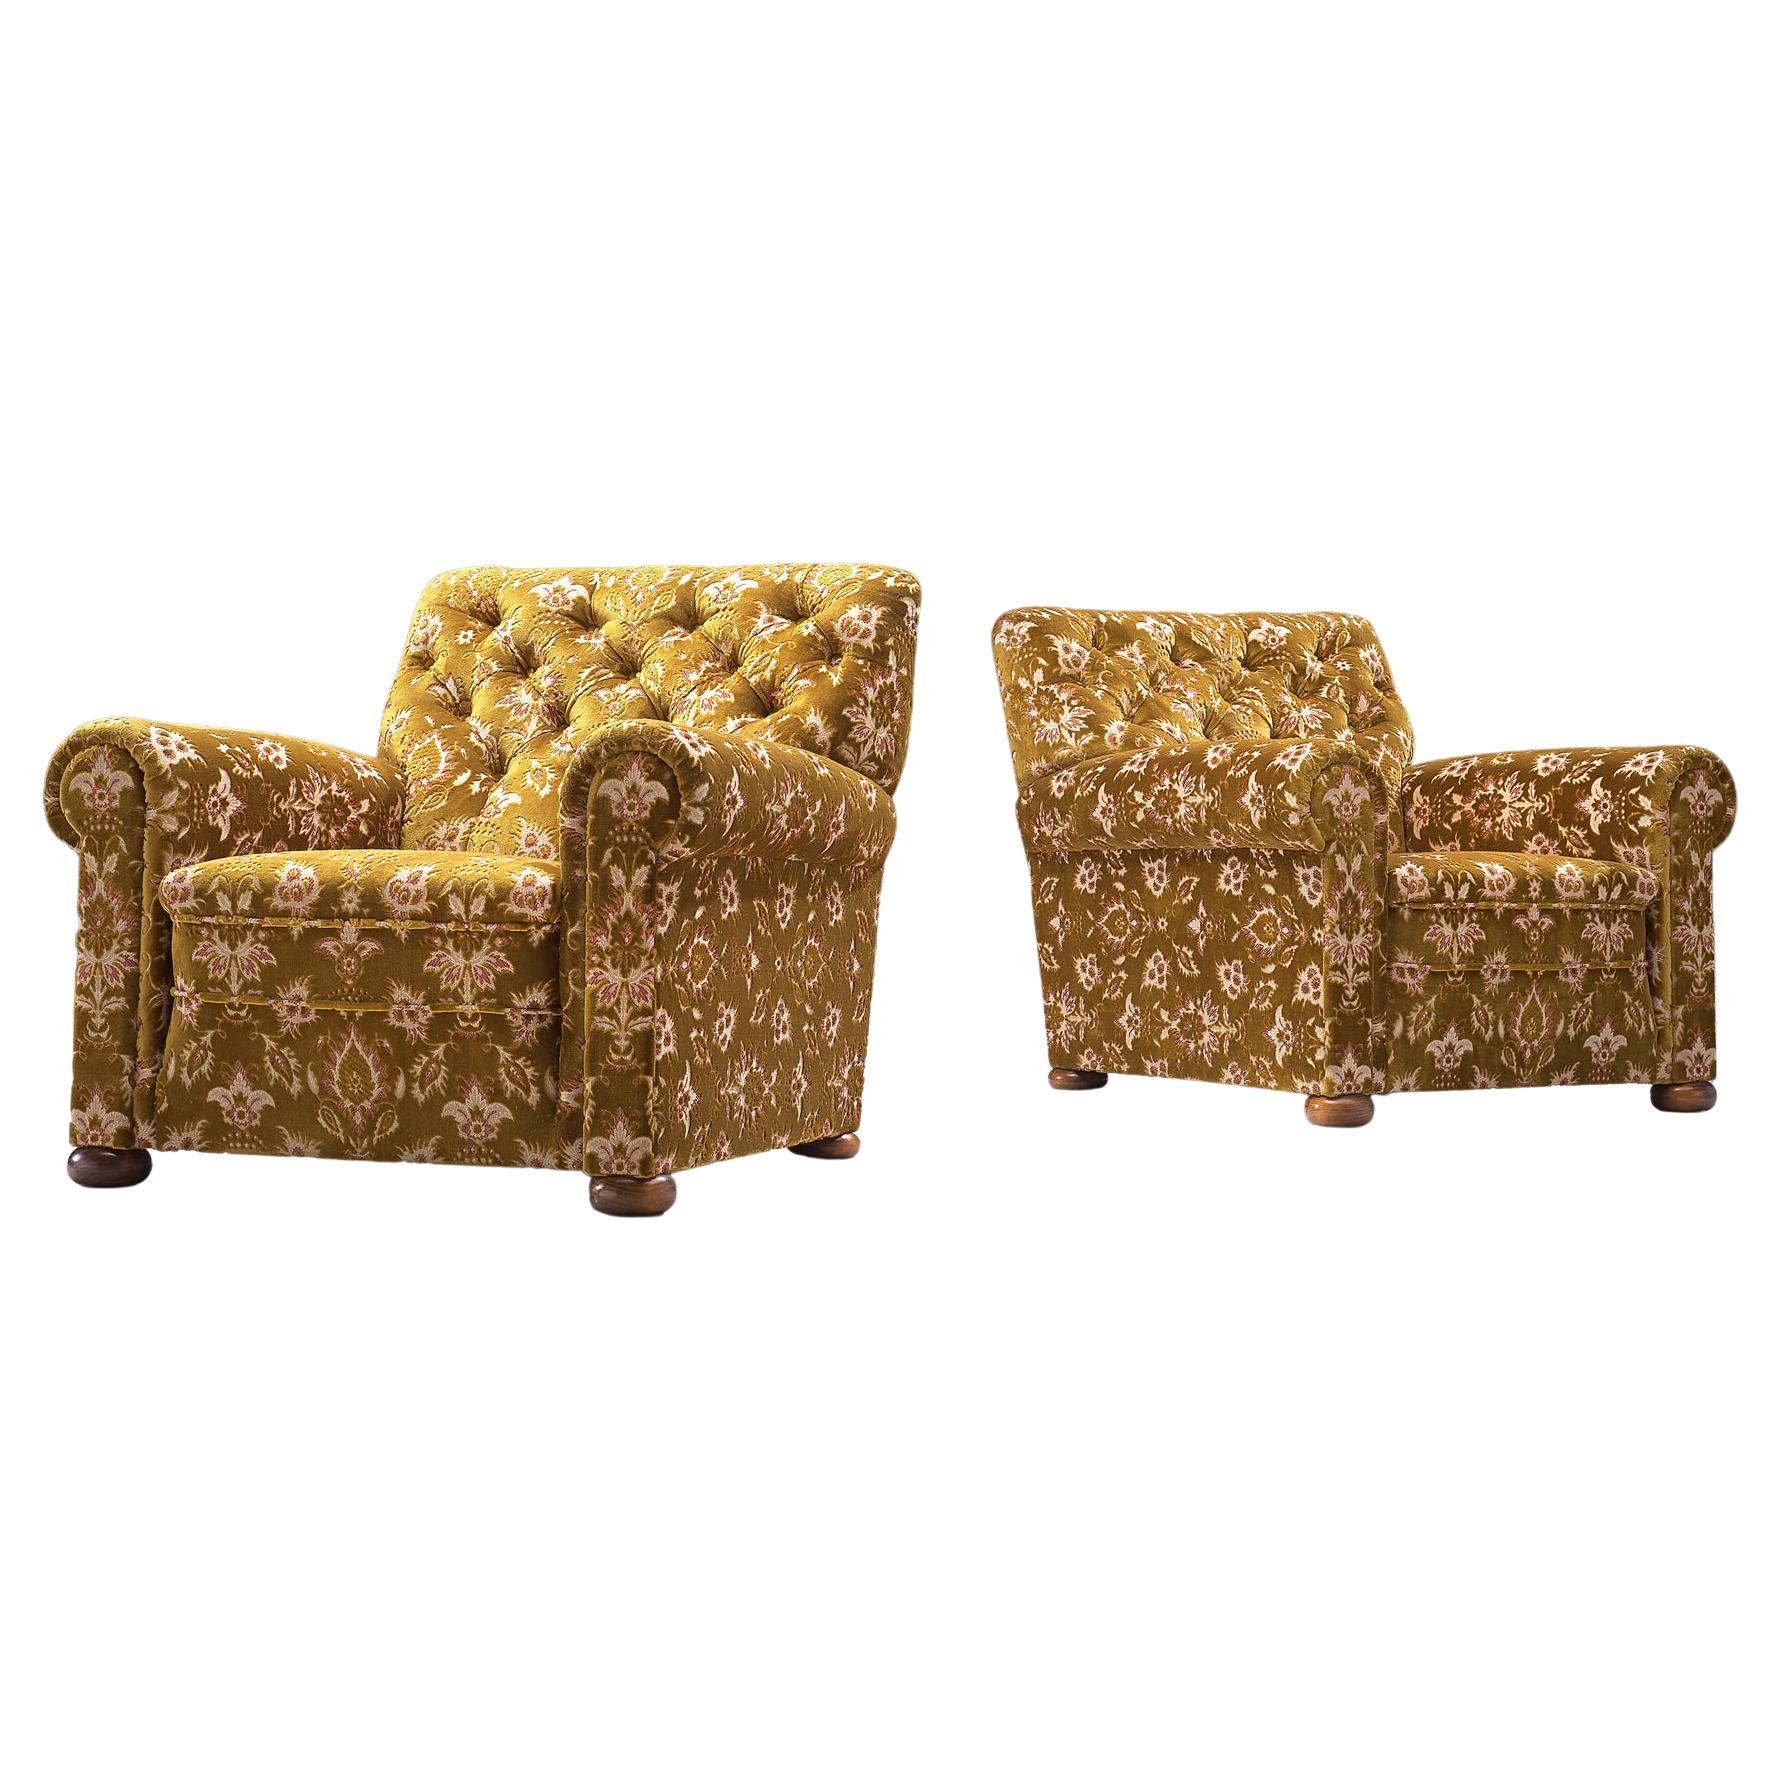 Italian Pair of Art Deco Lounge Chairs in Floral Velvet